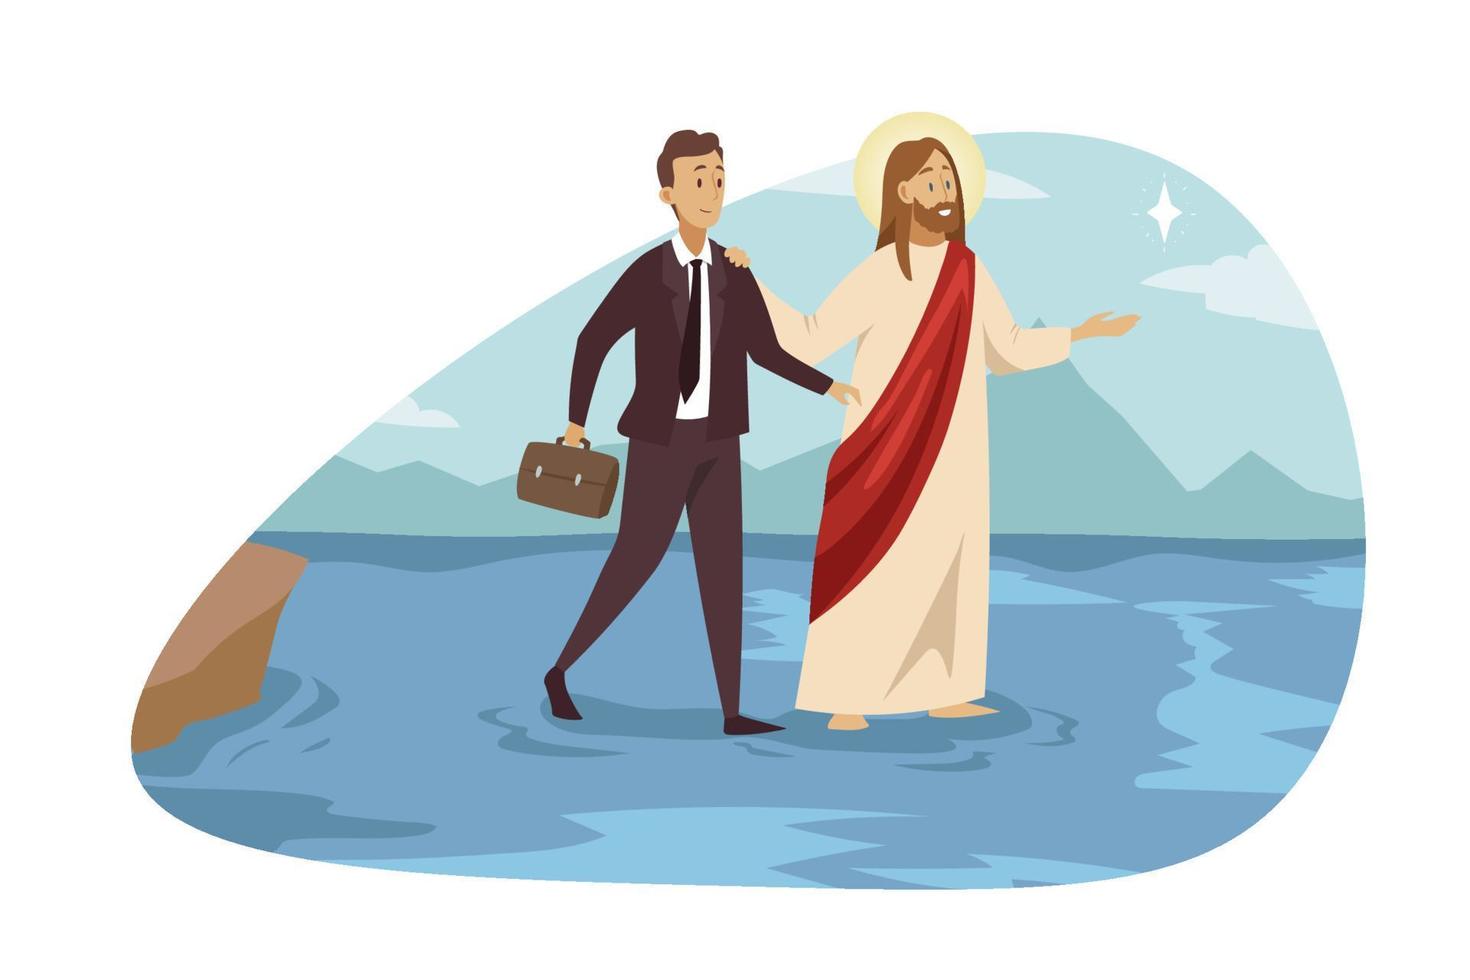 Support, christianity, business success concept. Jesus Christ religious biblical cartoon character son of God leading young happy businessman walking on water. Heaven blessing help goal achievement. vector